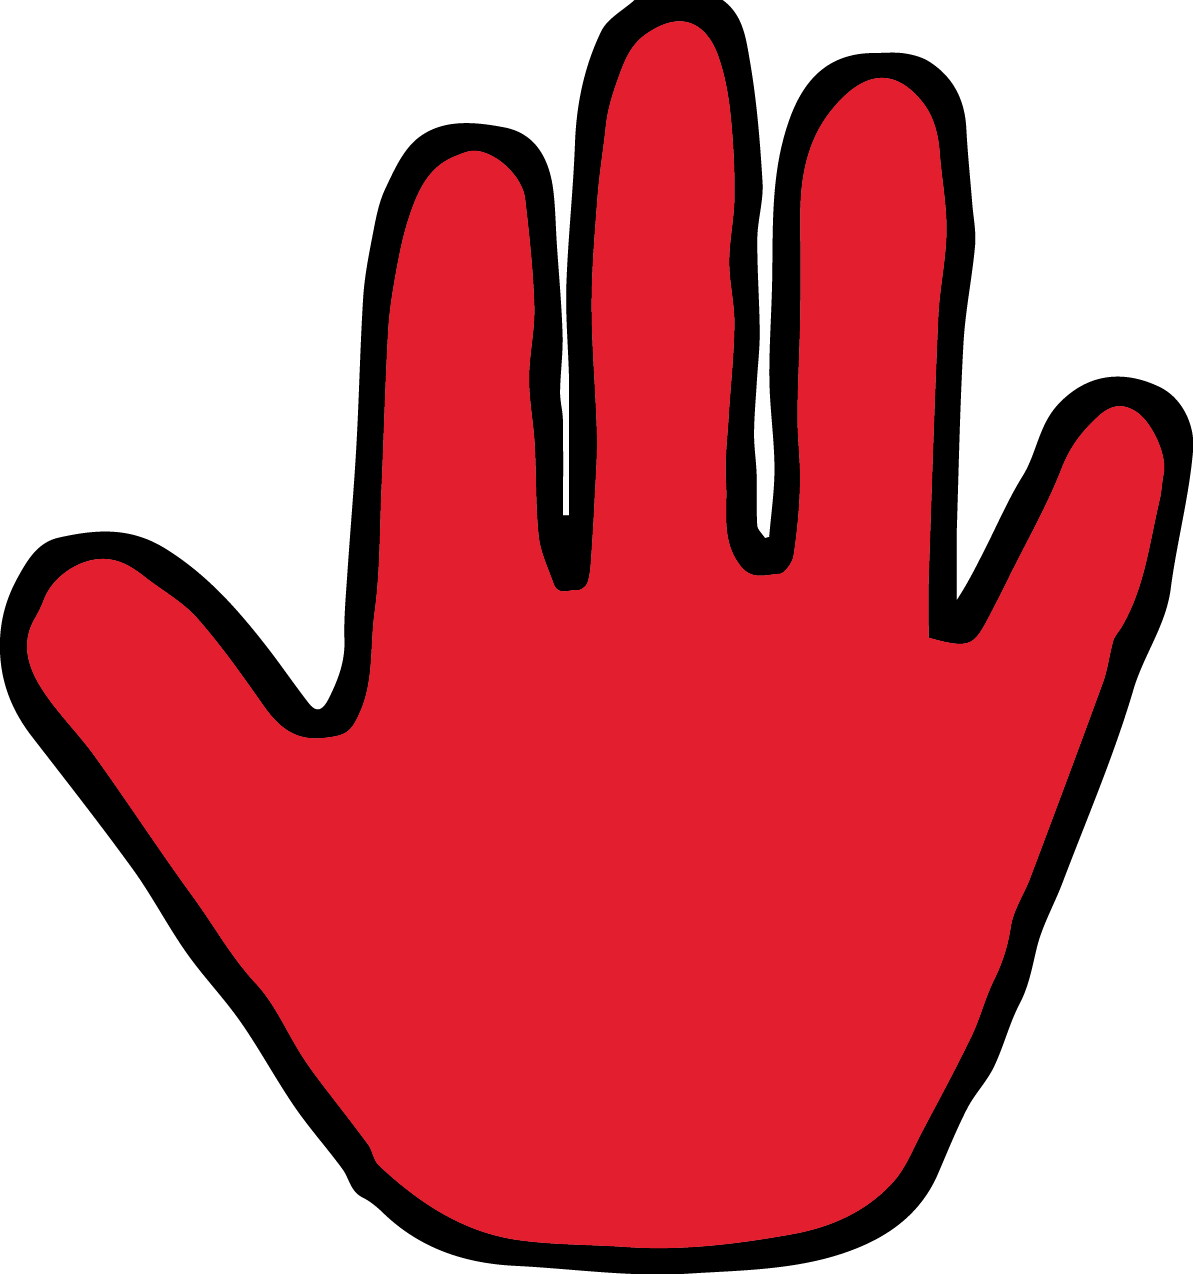 Red hand print images. Handprint clipart small